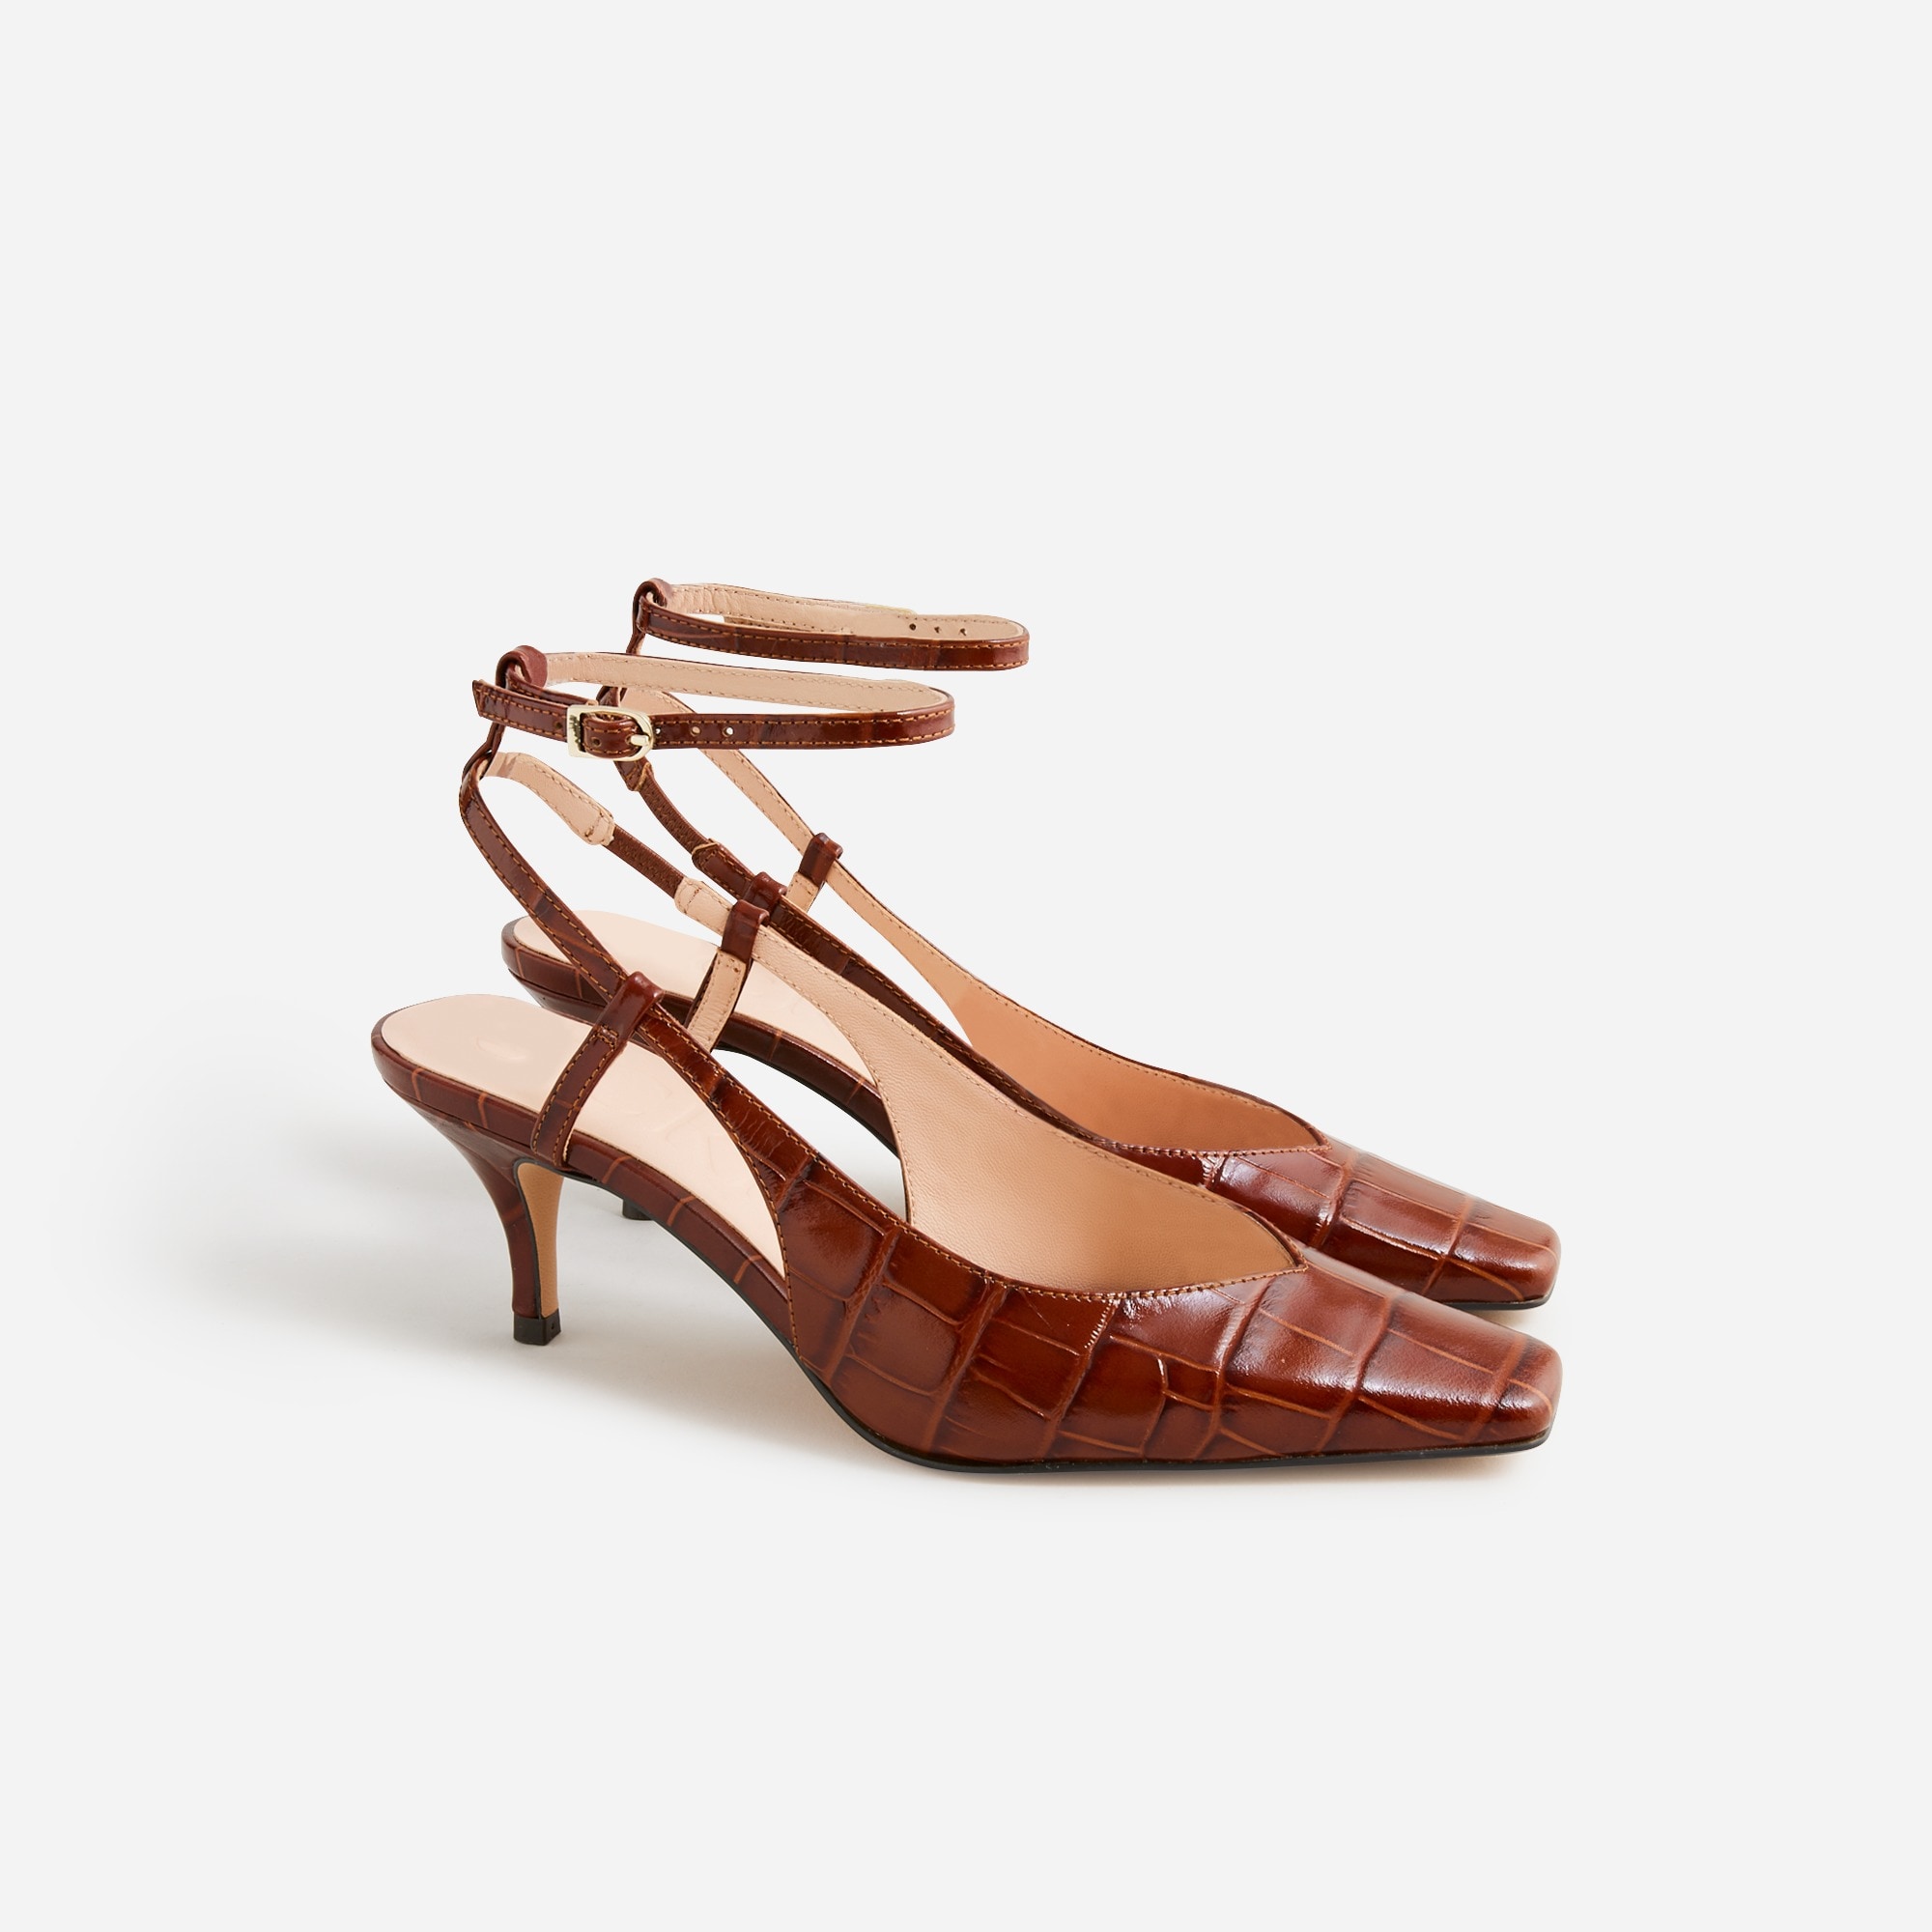  Leona ankle-strap heels in croc-embossed leather